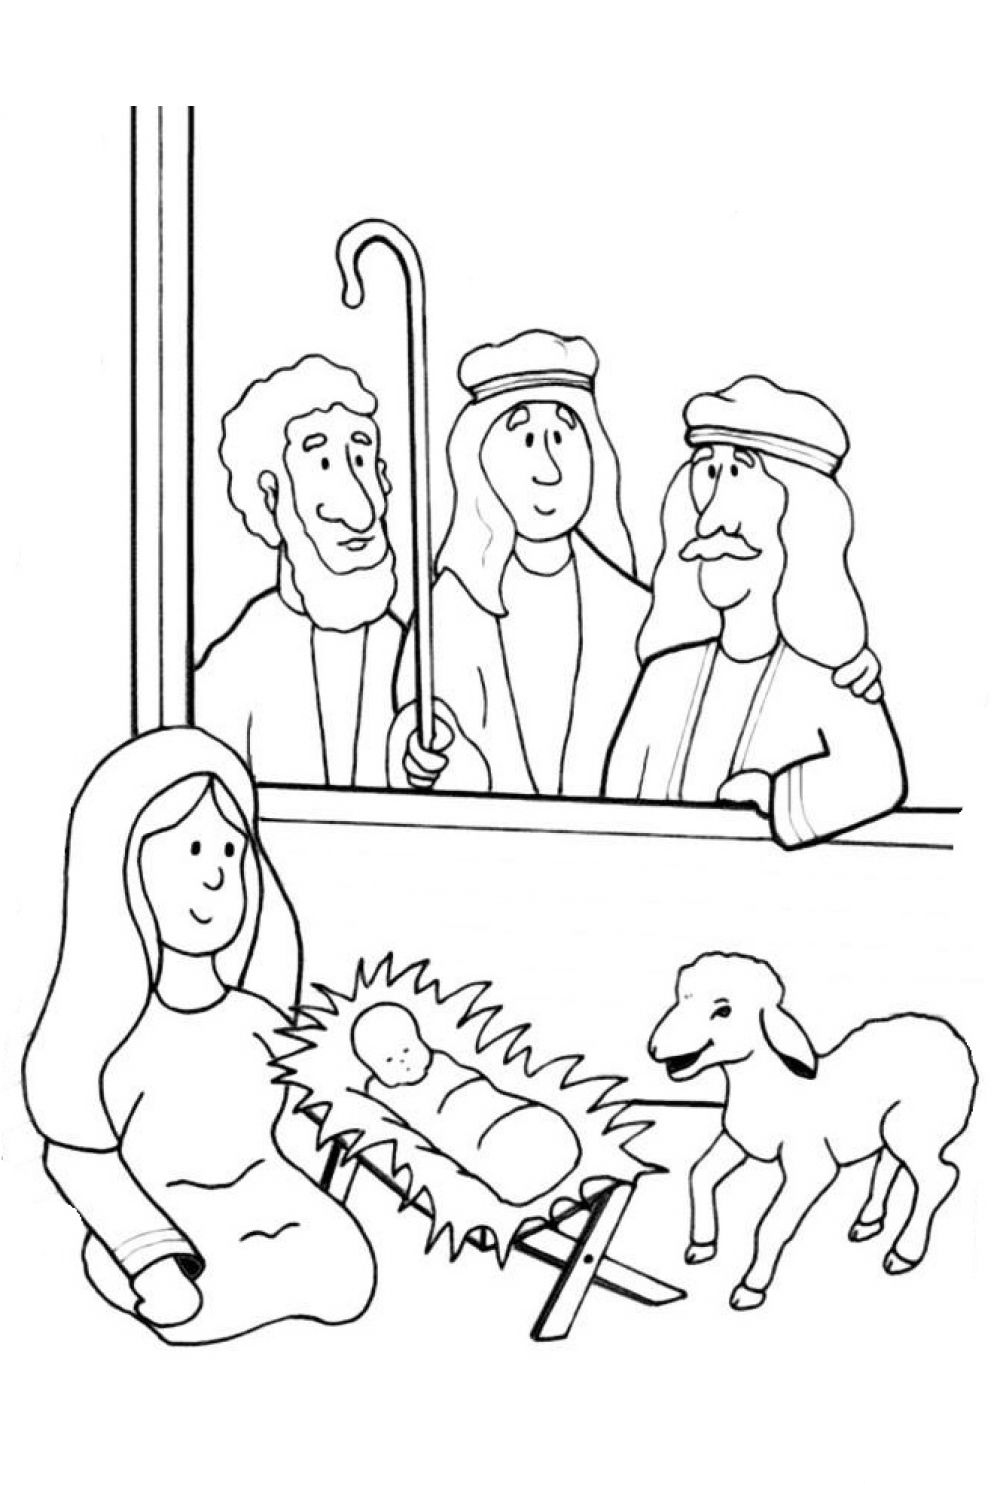 Coloring Pages Christmas. Collection of coloring books for the holiday